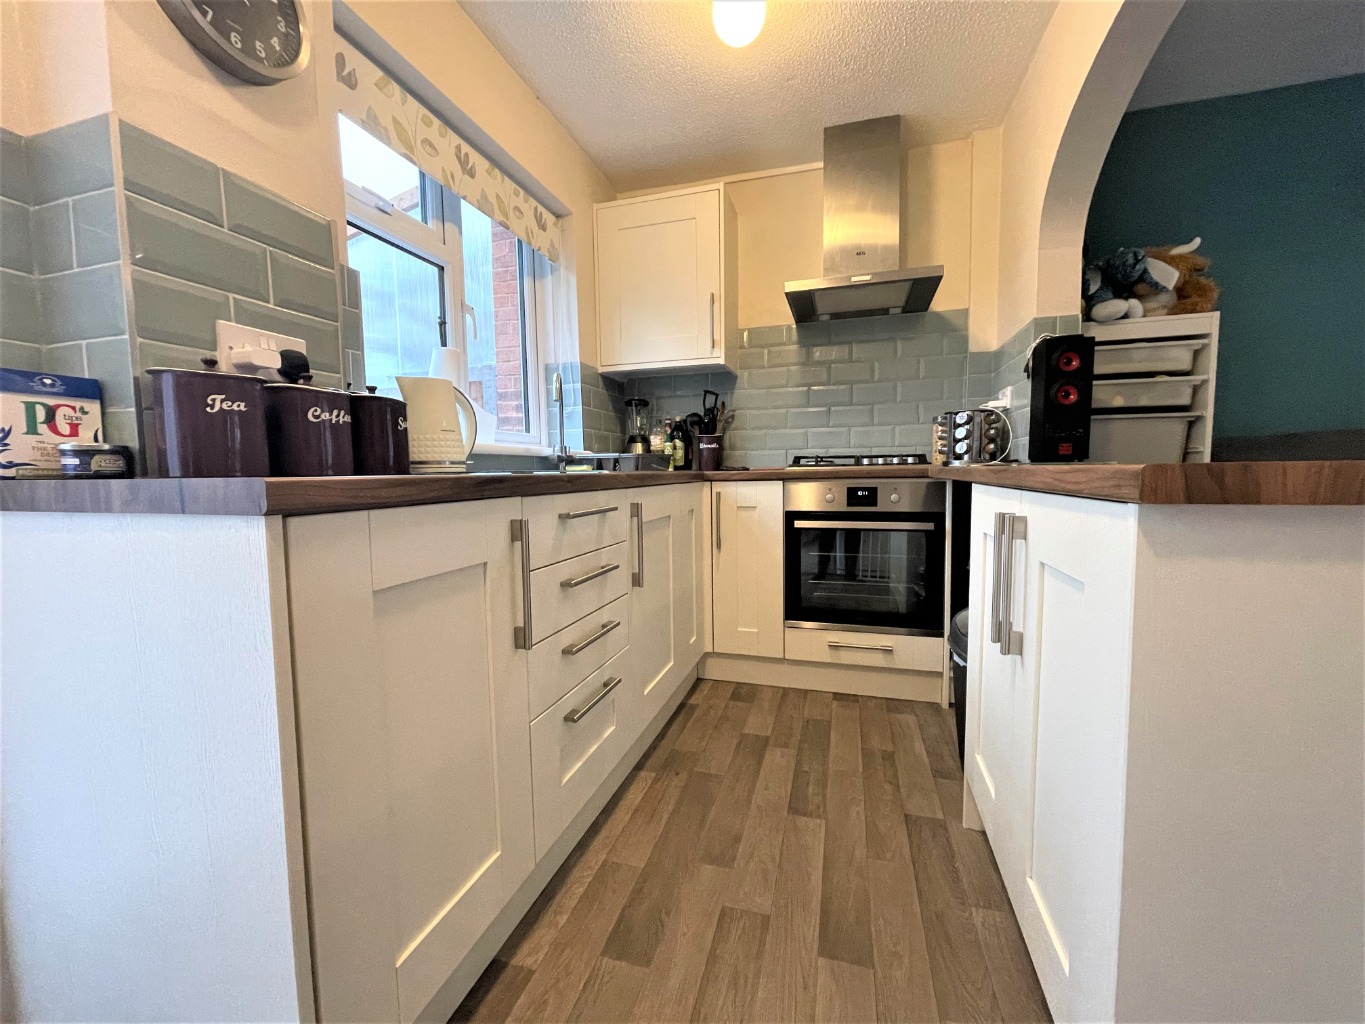 Marketed by Georgina Patey with Avocado Property. This two bedroom house in Harlton Close, Lower Earley has been upgraded to include newly fitted kitchen and bathroom, new boiler and redecoration throughout making it an ideal first time or investment purchase